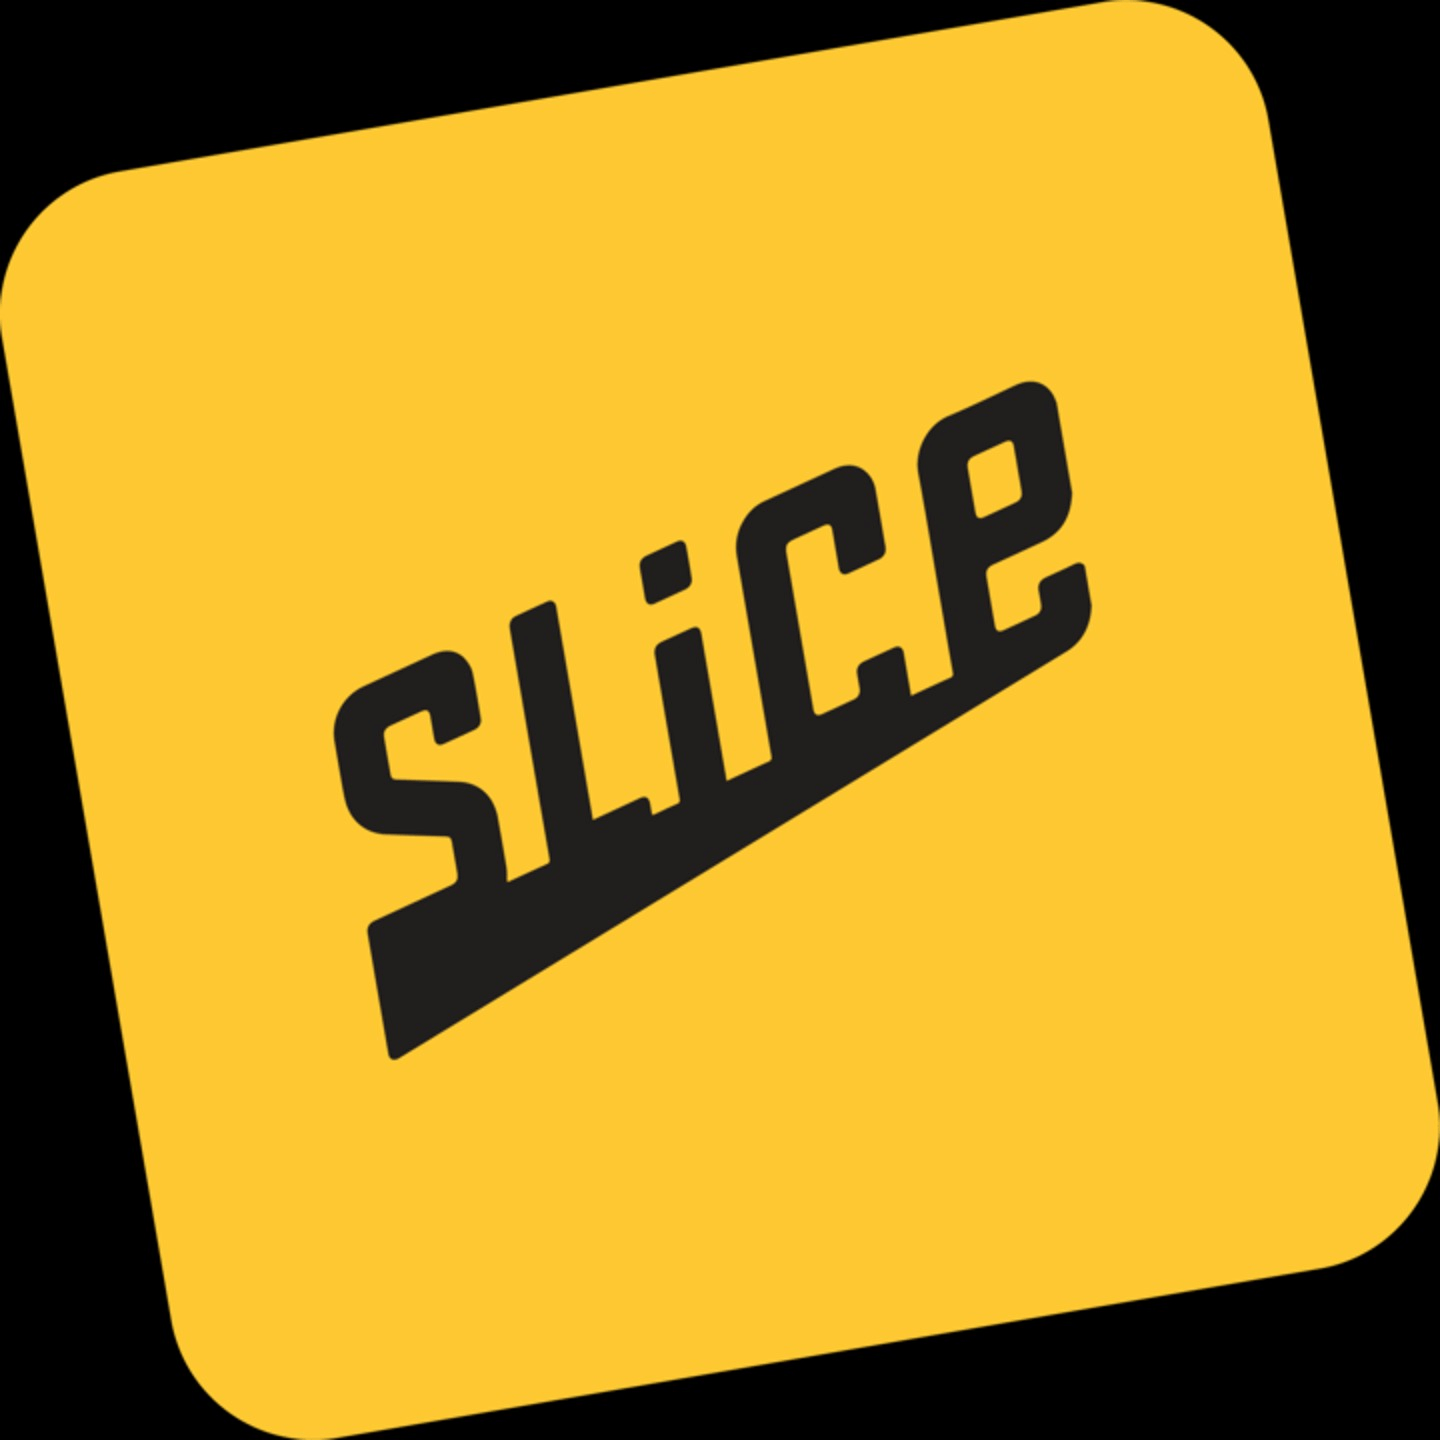 You can also order with us through Slice!